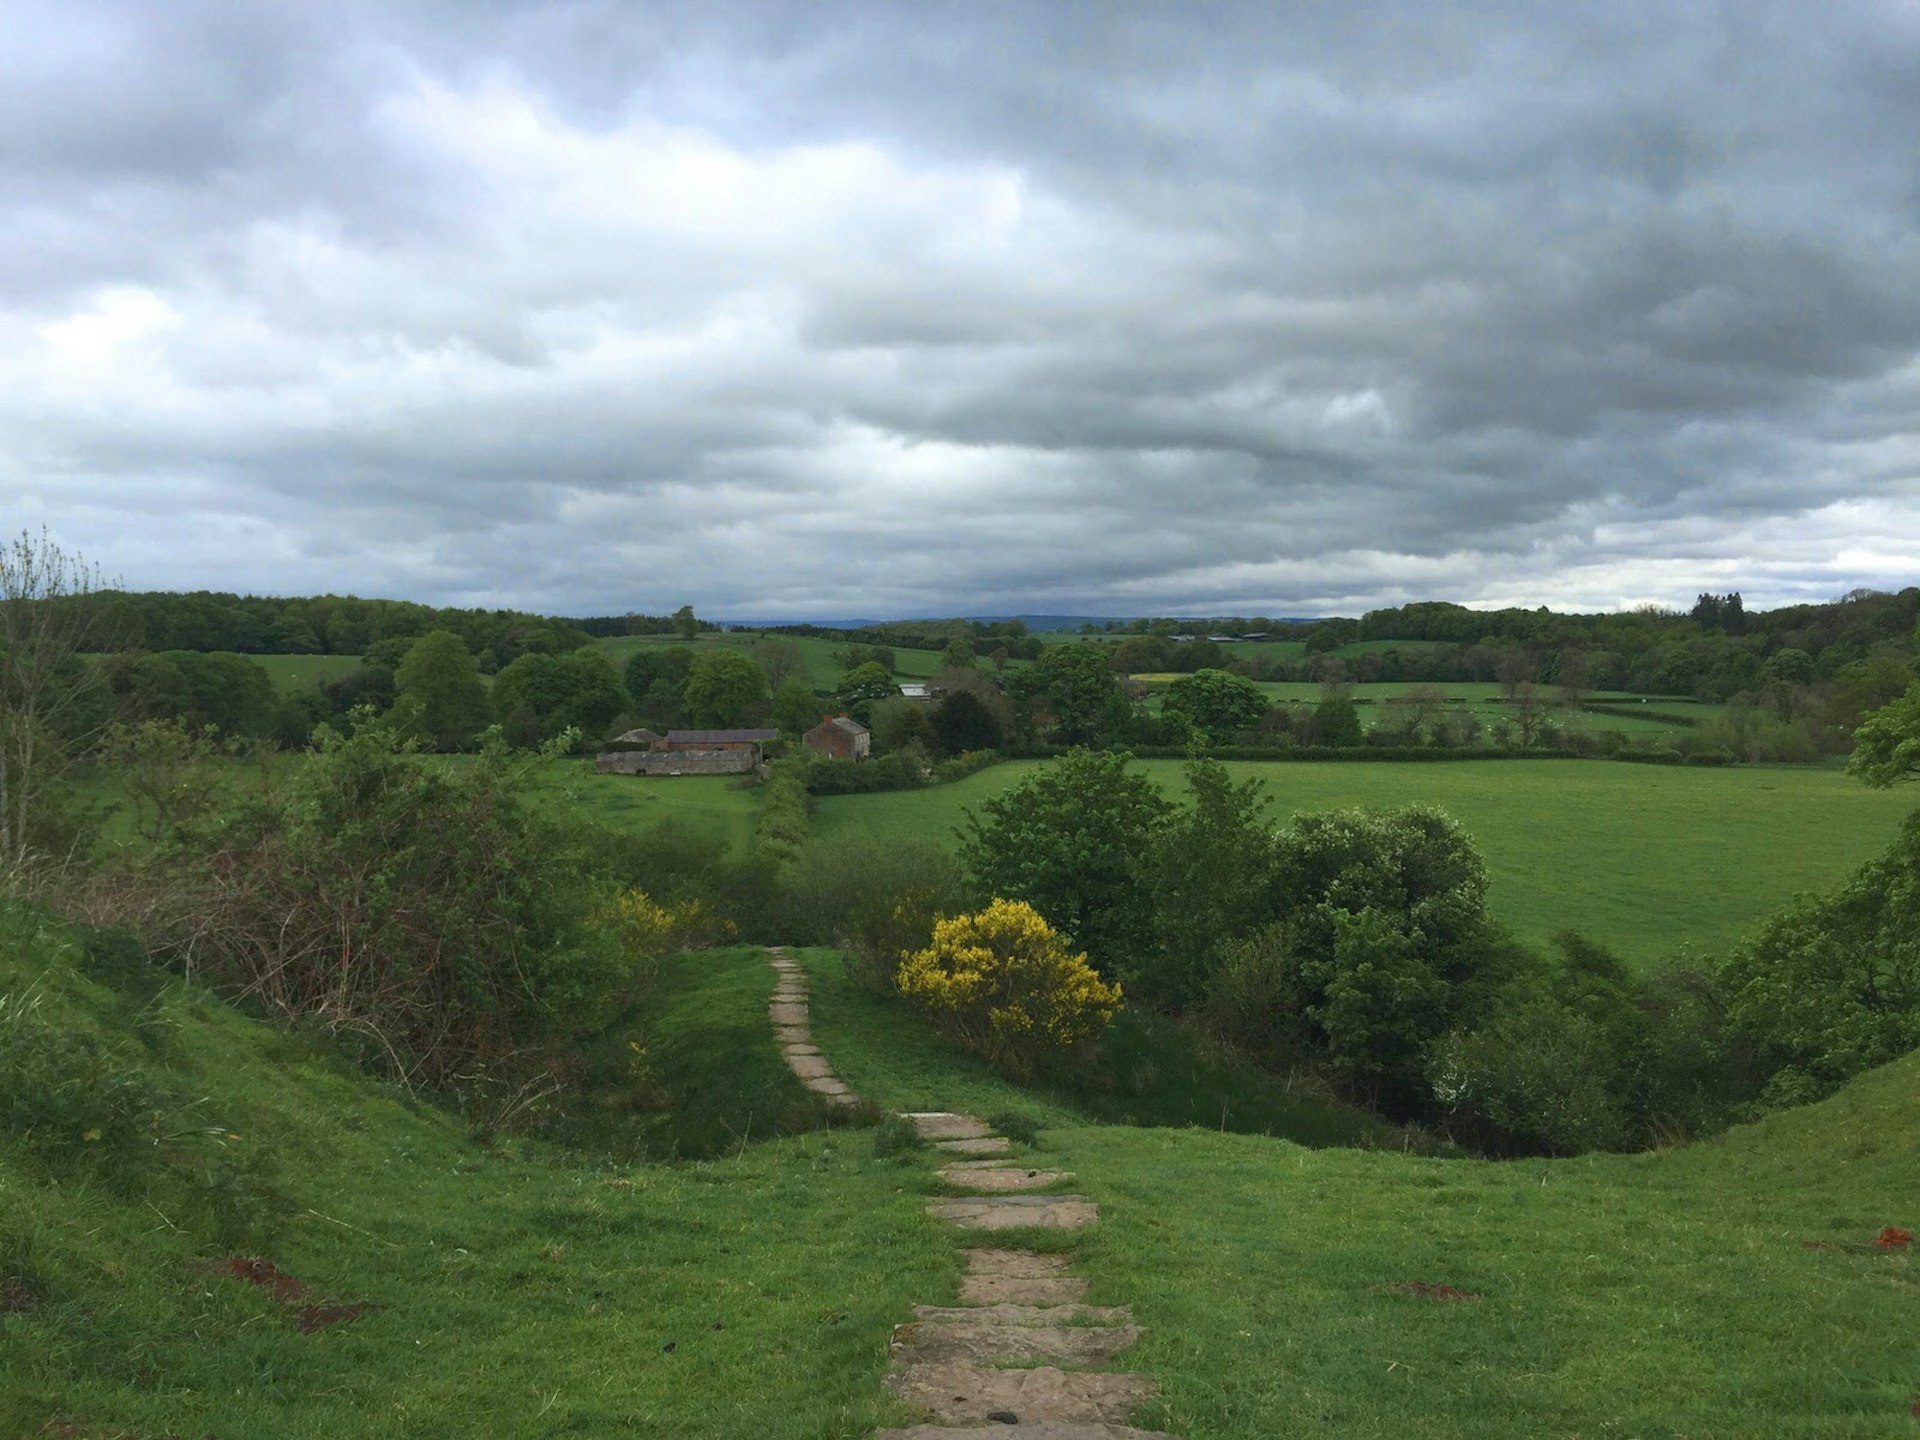 A footpath curves through a valley with grey clouds overhead